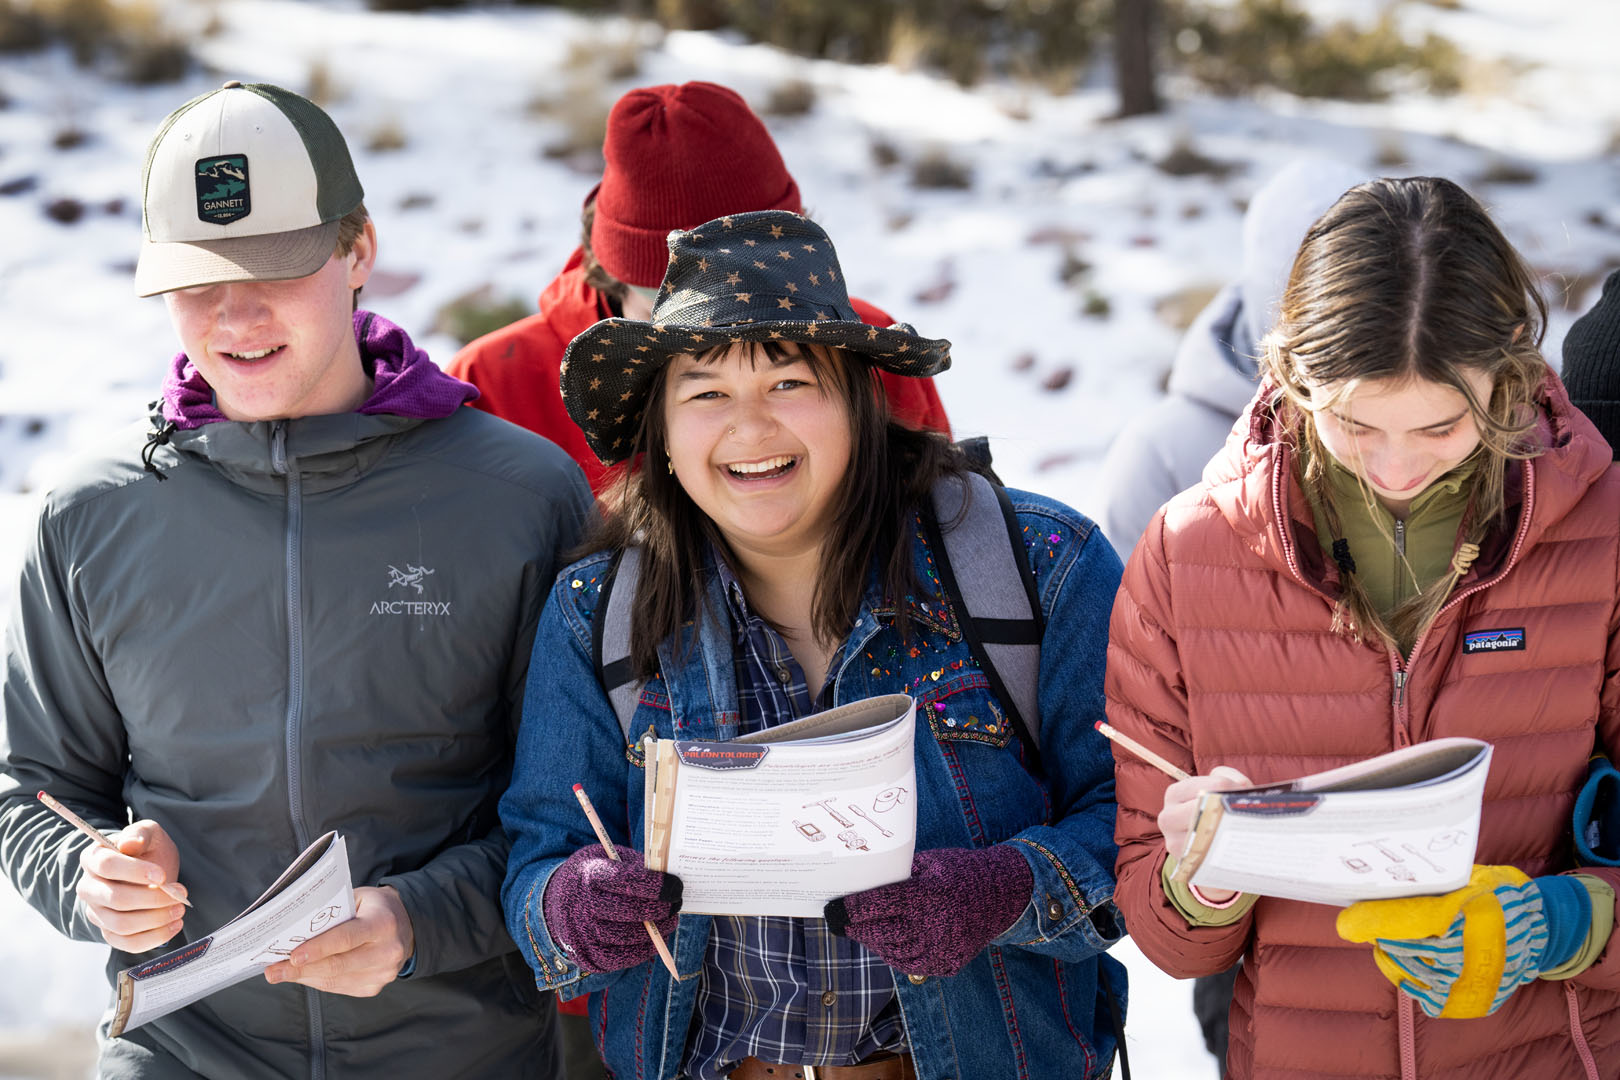 Students are pictured exploring the Florissant Fossil Beds in the Rocky Mountain Southwest on Jan. 27, 2023, as part of their WSO Priddy Experience. Photo by Lonnie Timmons III / Colorado College.